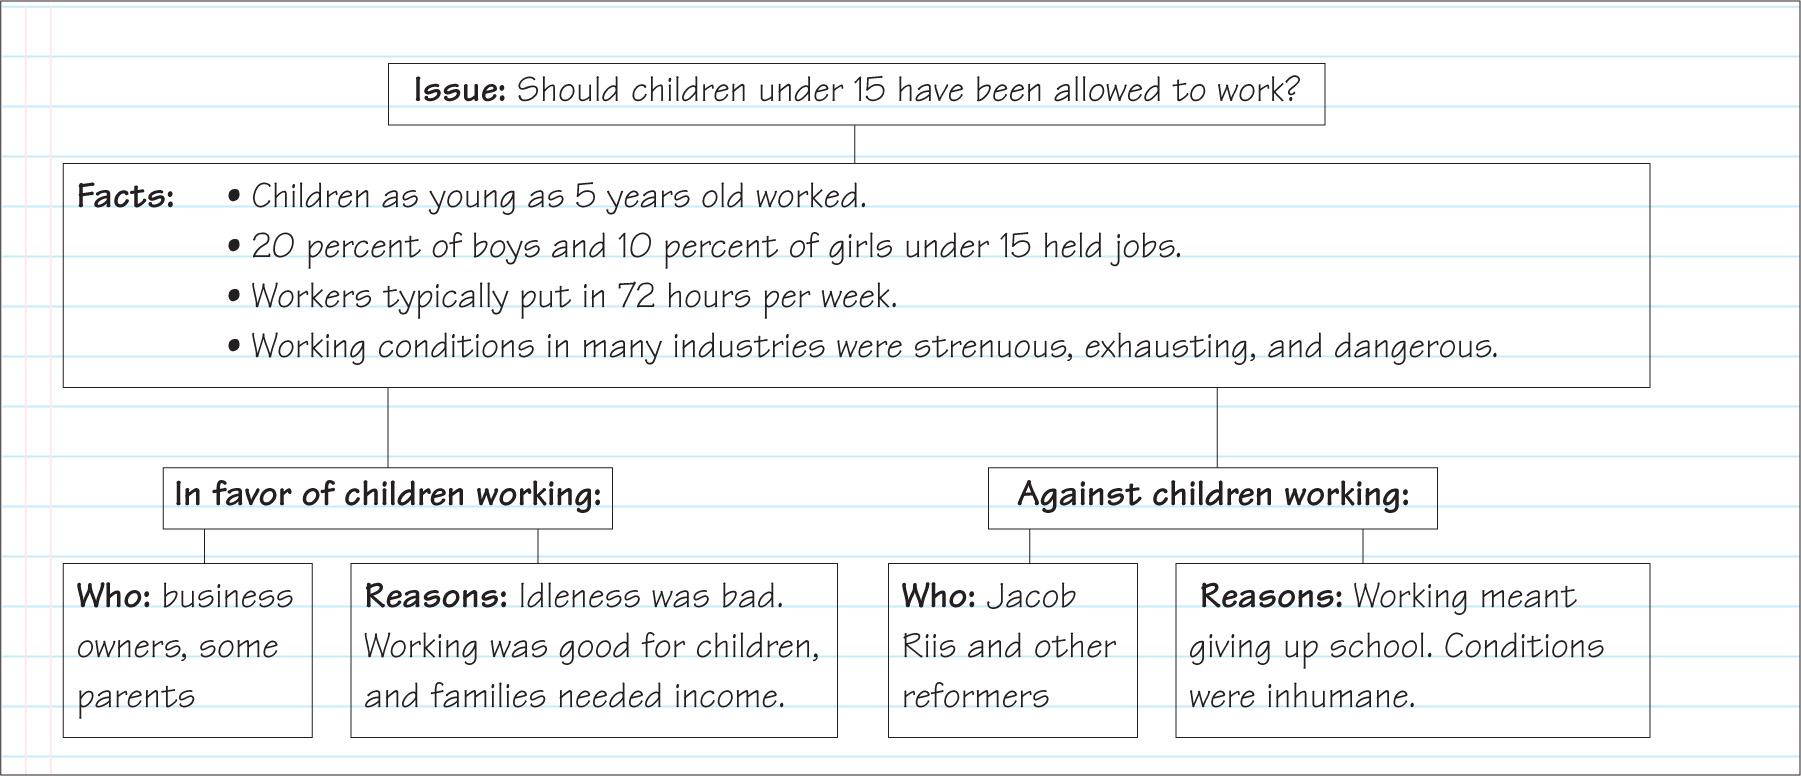 A diagram on the issue: should children under 15 have been allowed to work? The diagram lists Facts, then reasons in favor fo children working and reasons against.